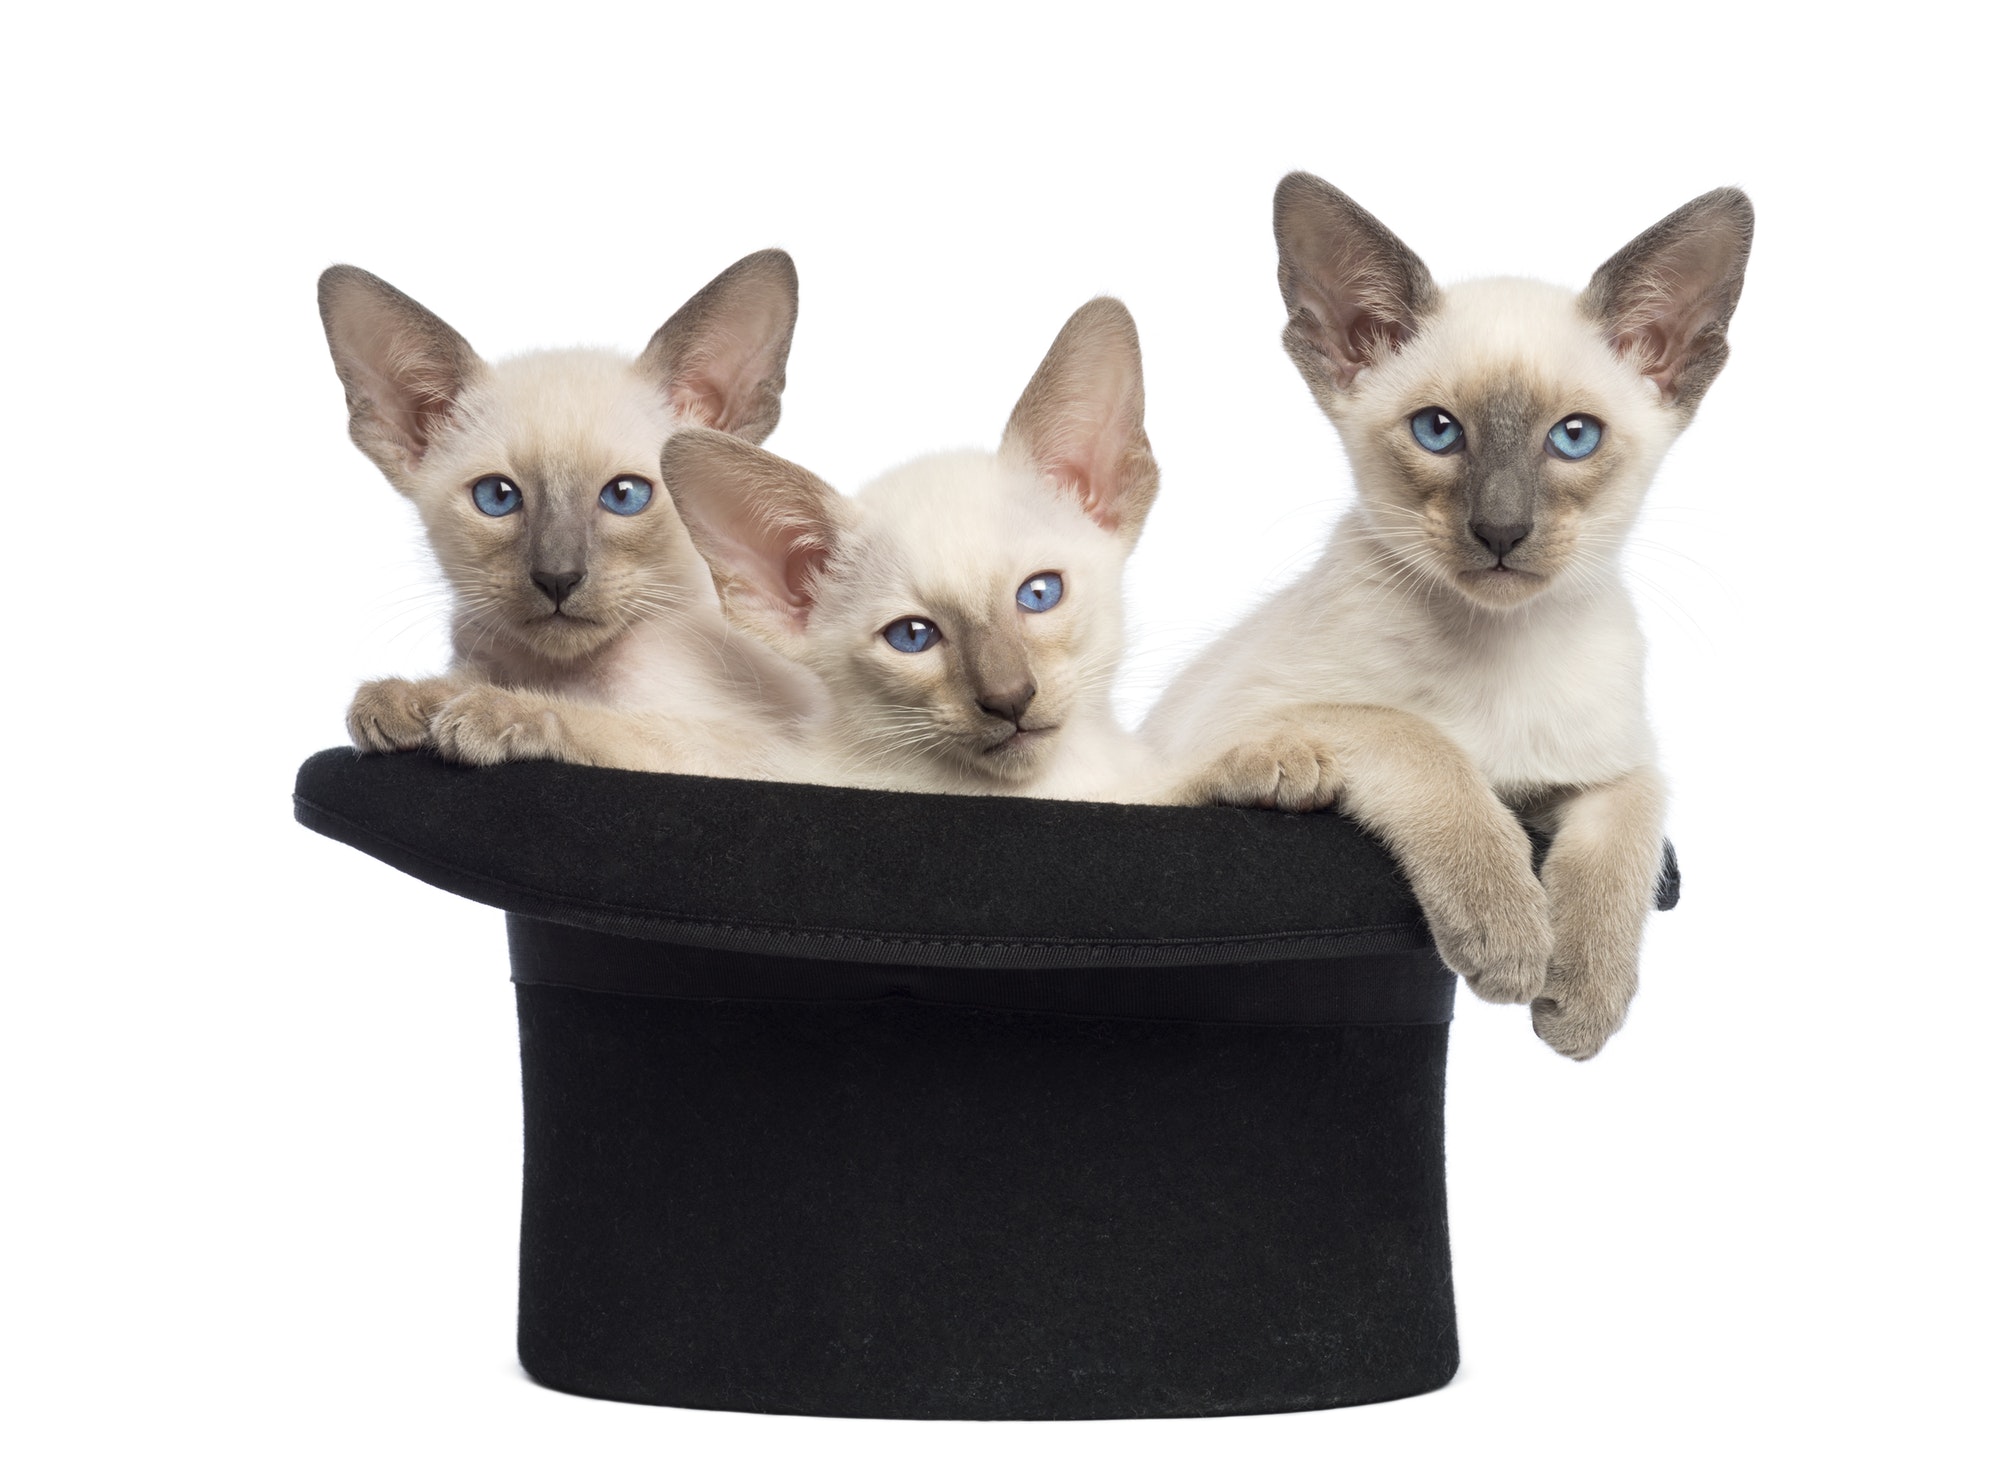 Three Oriental Shorthair kittens, 9 weeks old, sitting in magician's hat, against white background